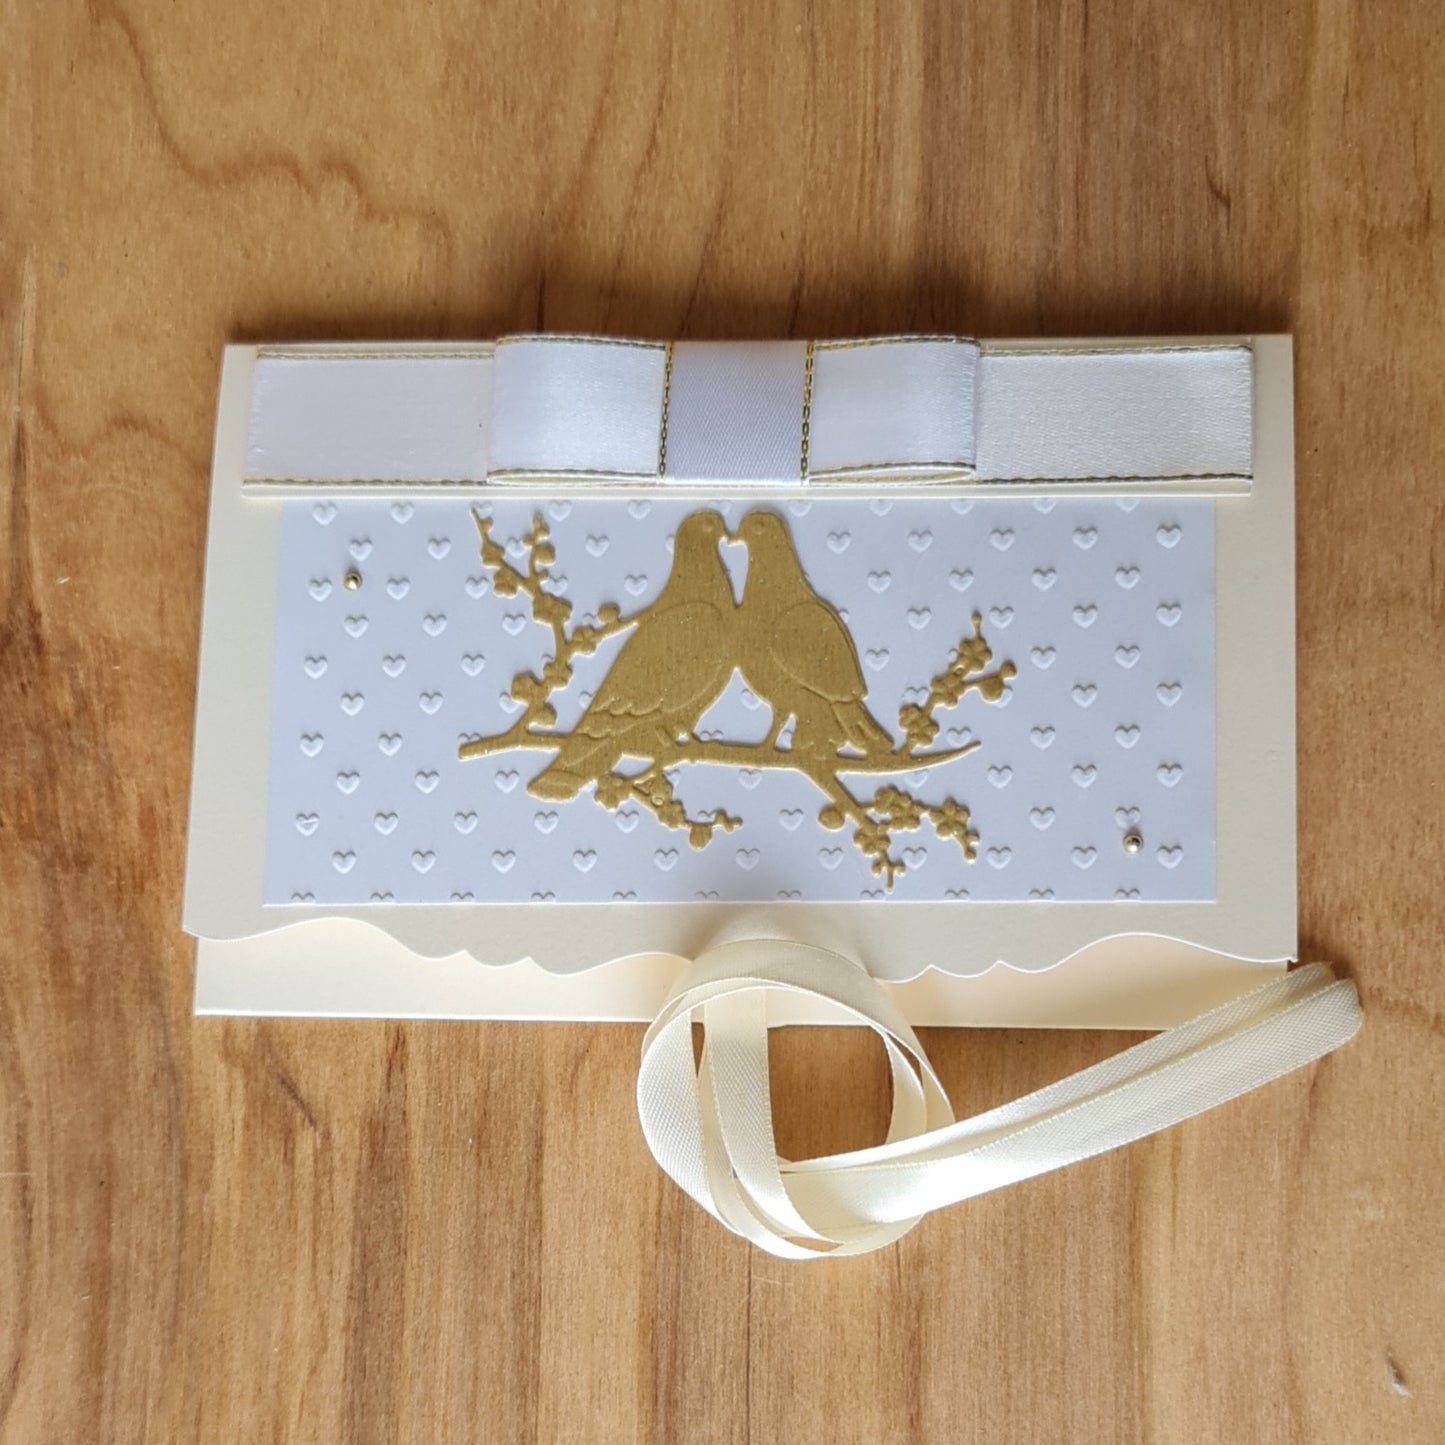 Cream wedding gift envelope with 3D print and two golden doves and cream ribbon closure 11.5 x 18 cm (APU2)